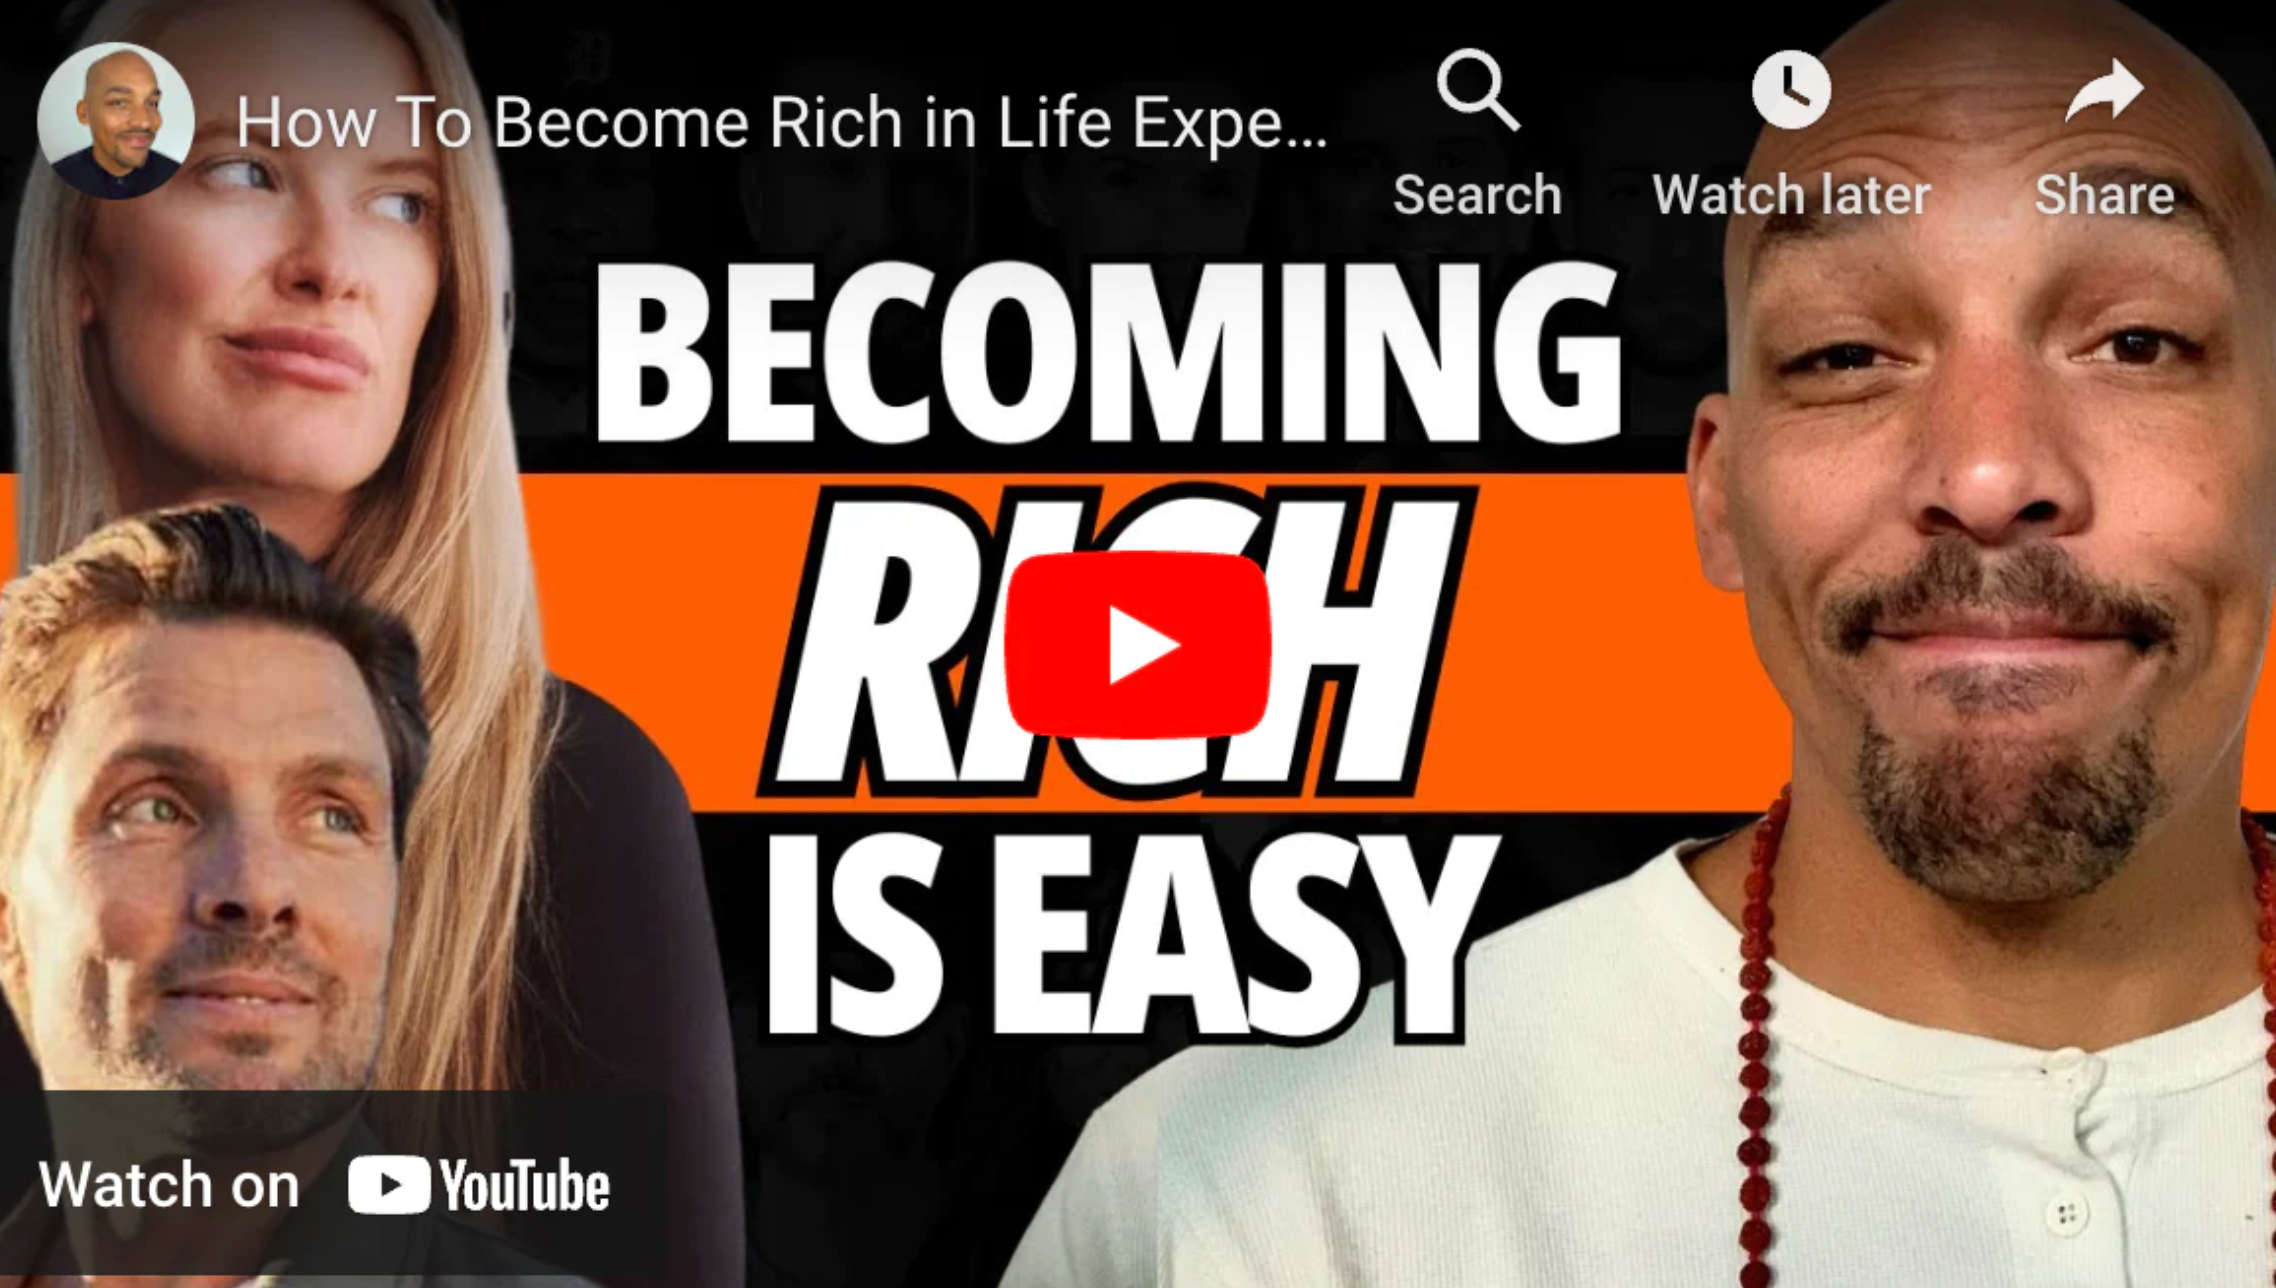 How To Become Rich in Life Experience - An Interview With Light Watkins